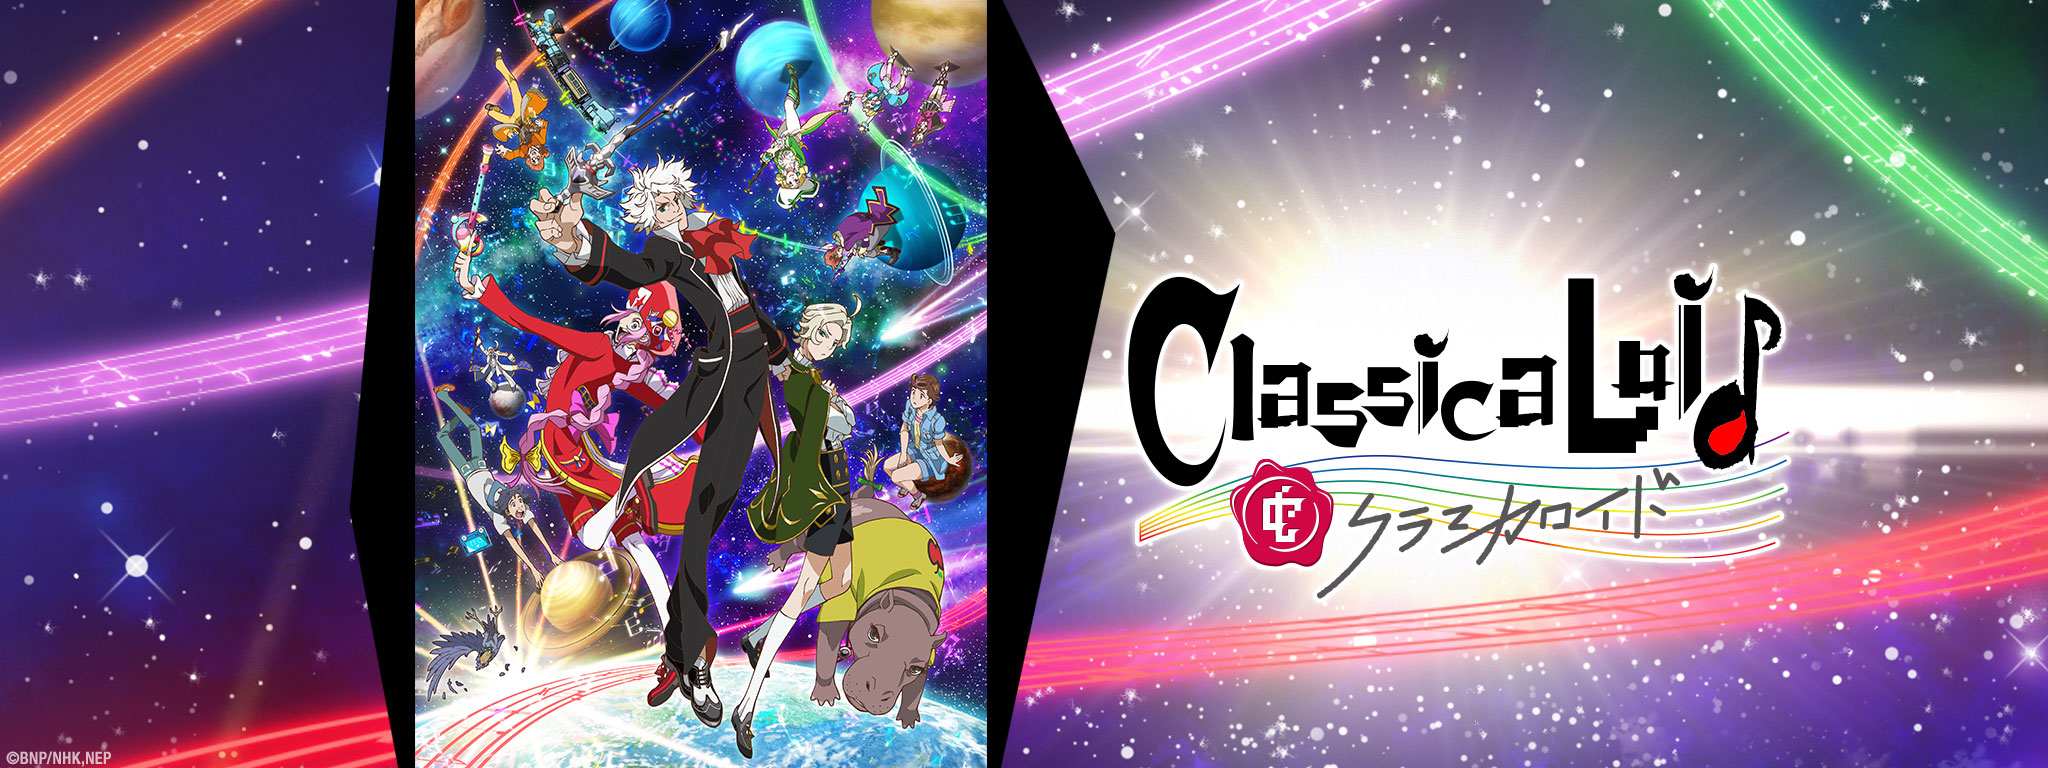 Title Art for ClassicaLoid 2